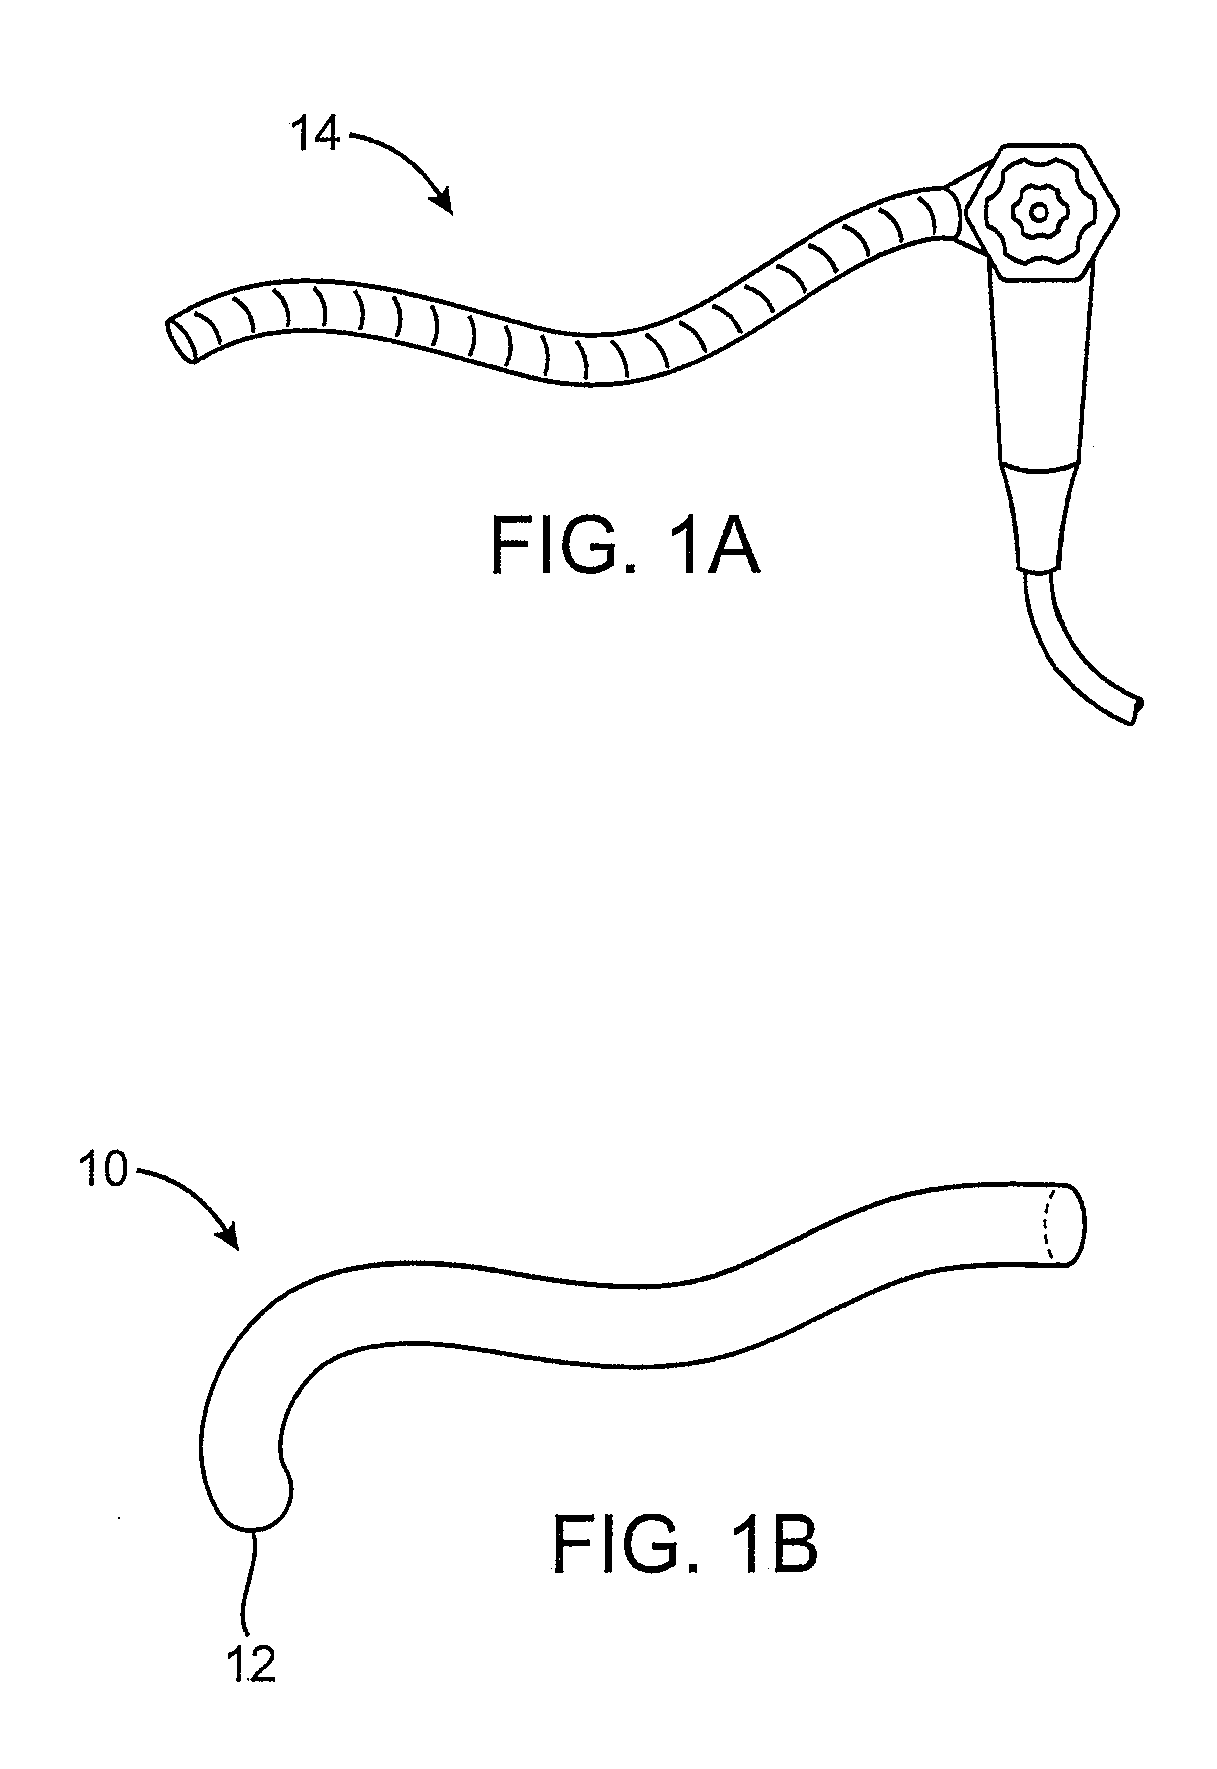 Methods and apparatus for maintaining sterility during transluminal procedures